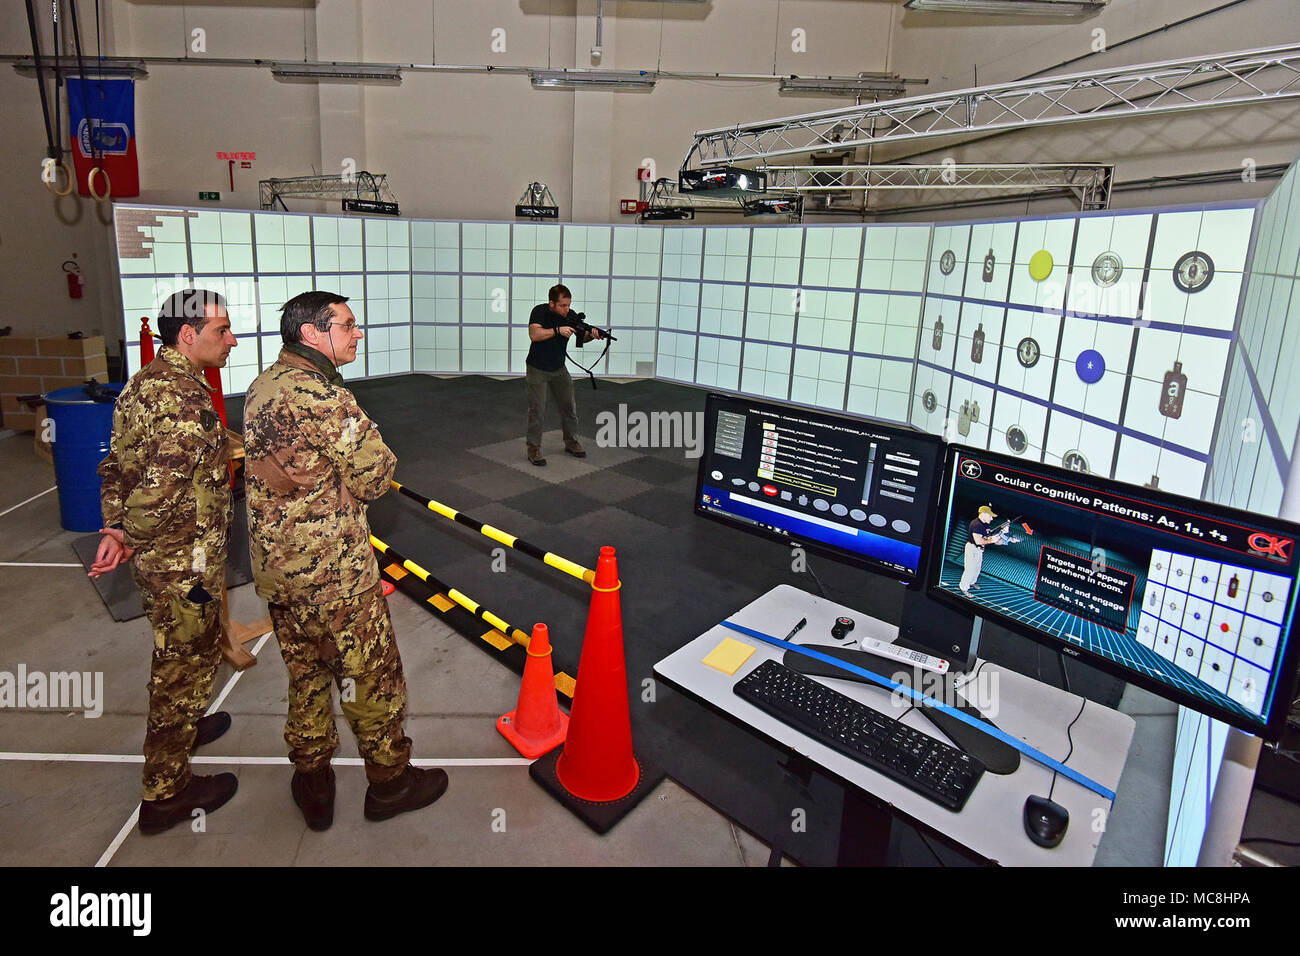 Michael Kennicker, instructor Gunfighter Gym (right), shows at Lt. Col. Giuseppe Galloro Chief Training Office of the 85th Reggimento Addestramento Volontari “Verona” (center) and Caporale Maggiore Capo Scelto Damiano (left) , simulated shooting drill at the Gunfighter Gym , Caserma Del Din, Vicenza, Italy, March 28, 2018. Italian Soldiers use U.S. Army RTSD South equipment to enhance bilateral relations and to expand levels of cooperation and the capacity of the personnel involved in joint operations. Stock Photo